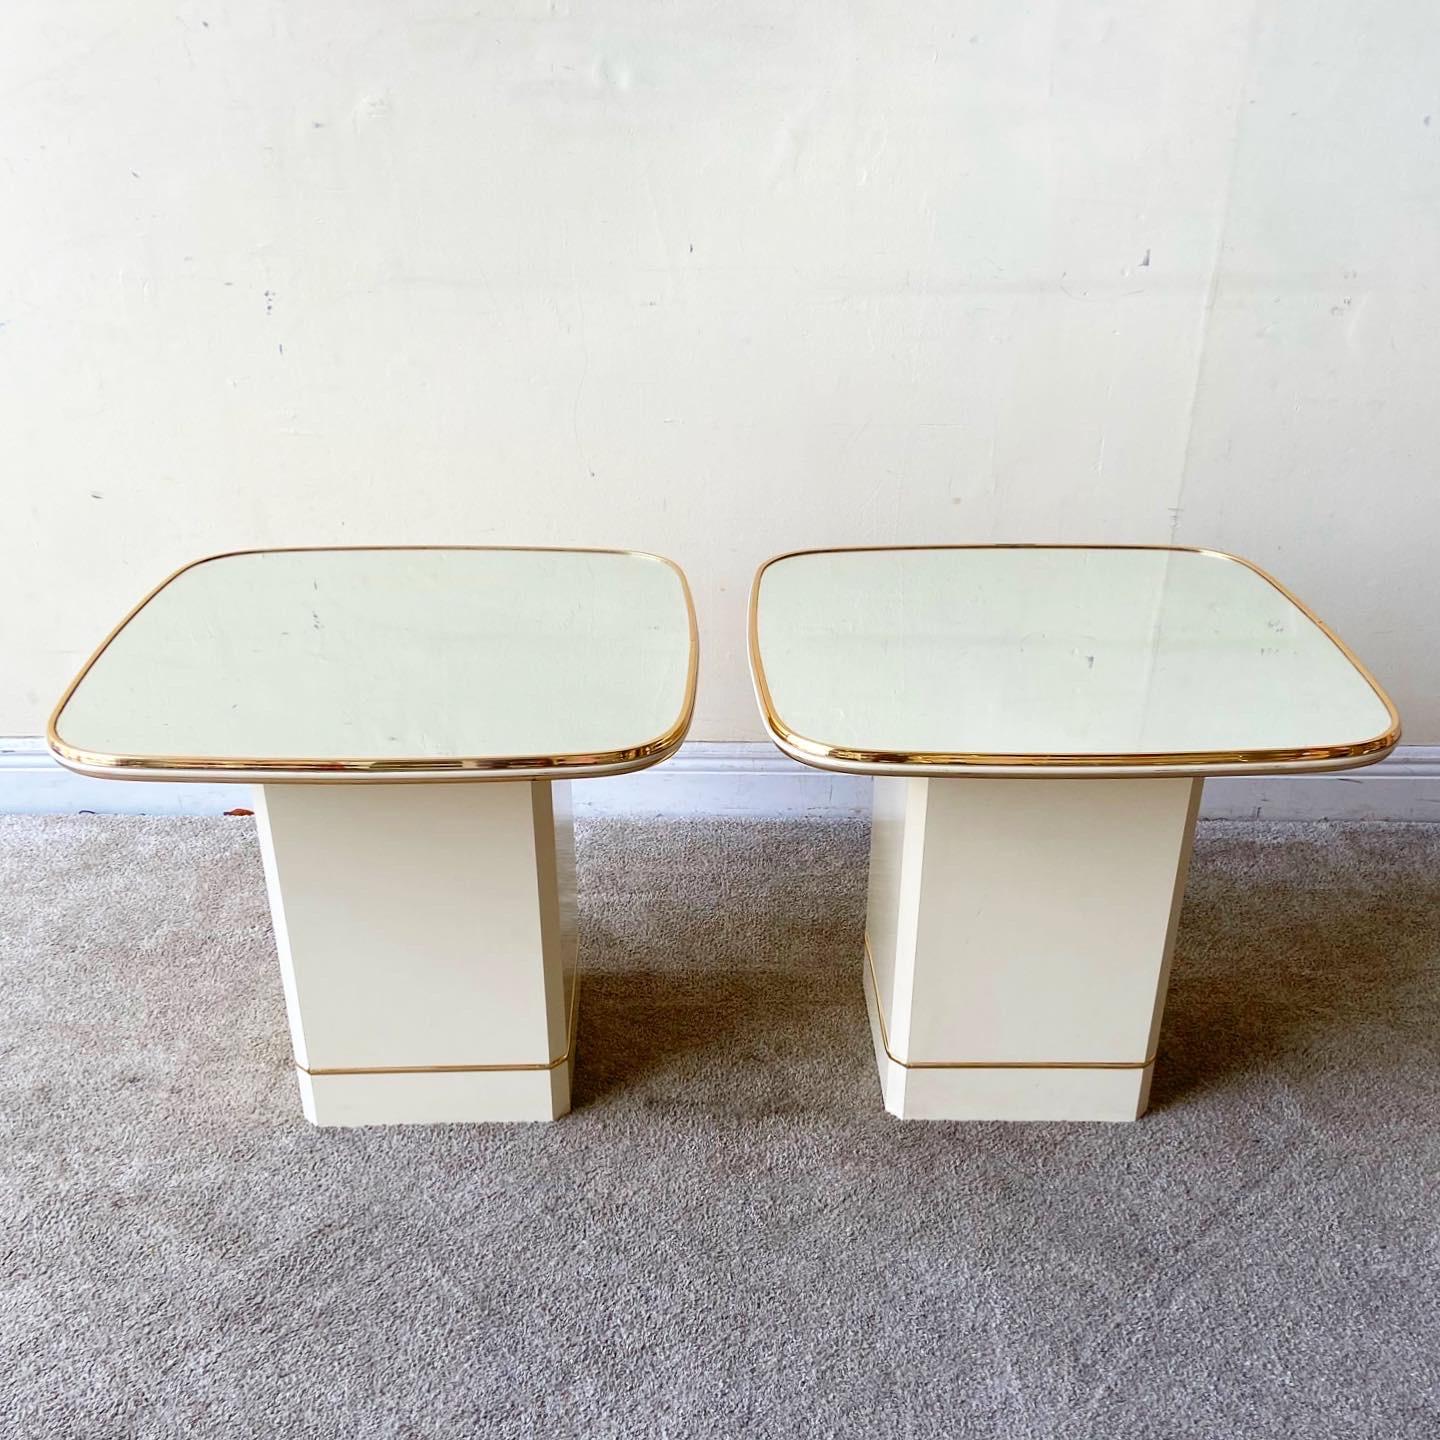 Incredible pair of postmodern 1980s rounded square top side tables. Each chair features a mirrored top with a gold trim.
 